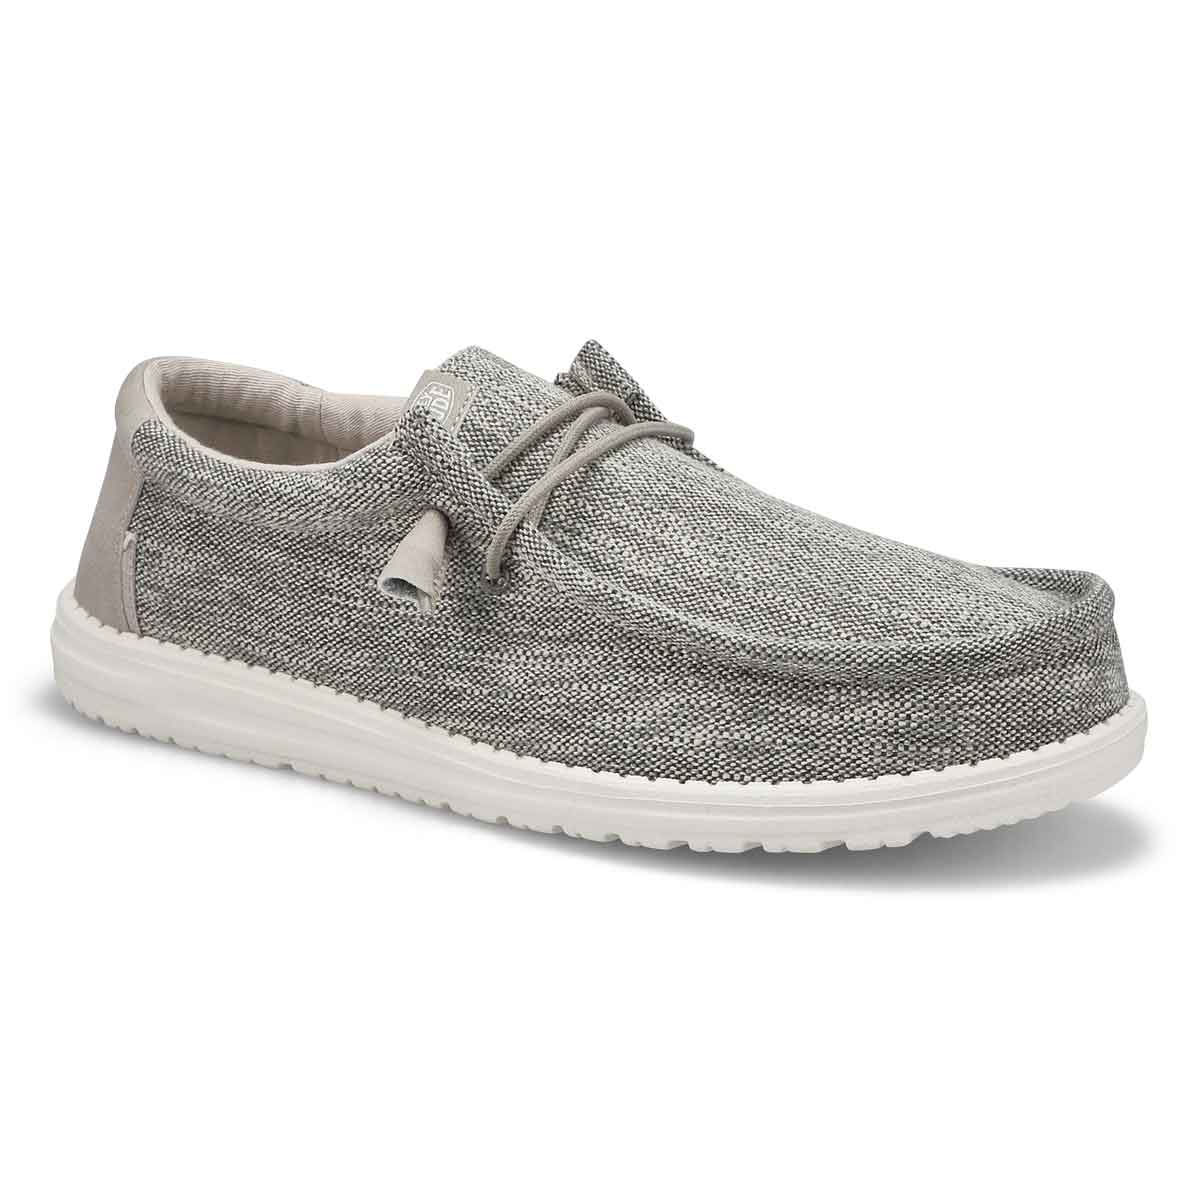 HEYDUDE Men's Wally Ascend Casual Shoe - Abys | SoftMoc USA